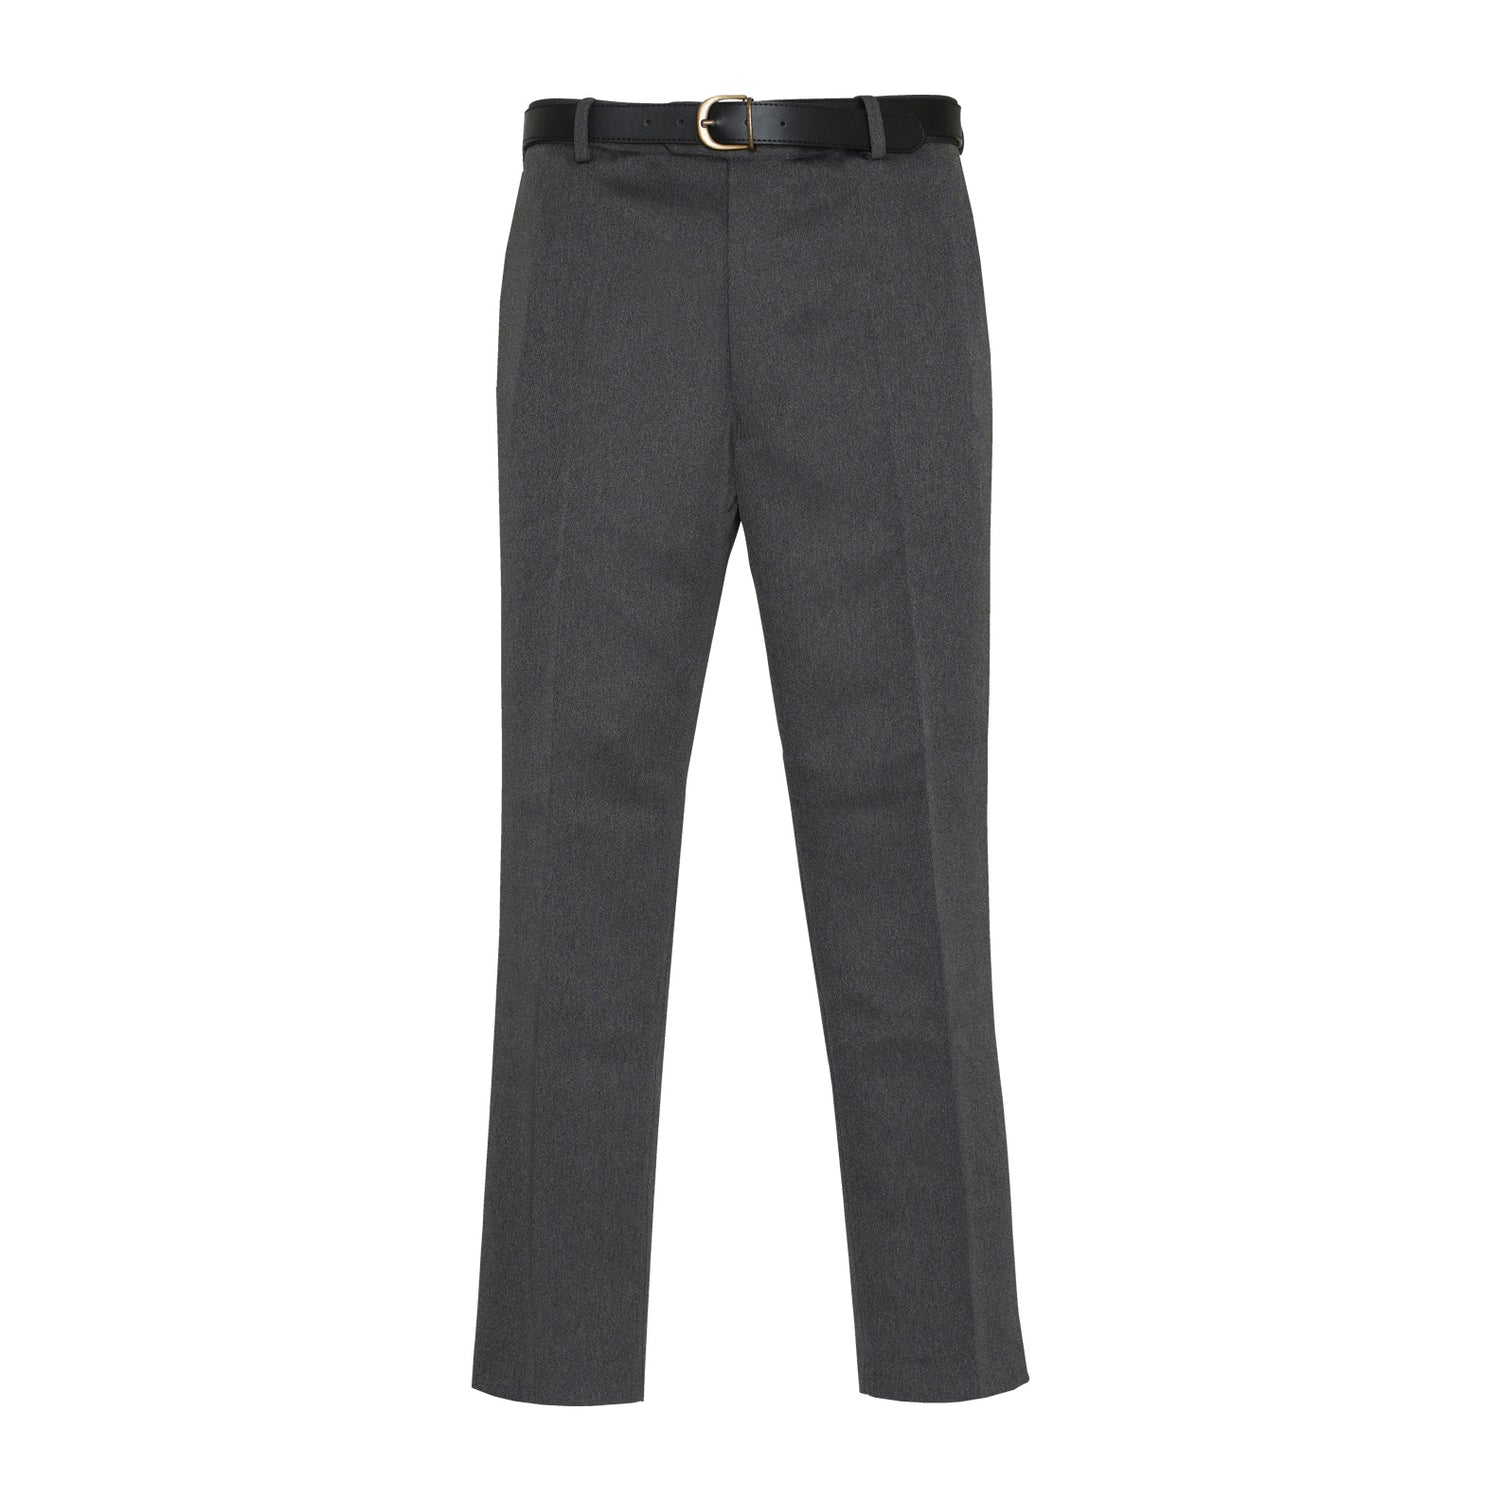 Buy trousers for men at best price - North Republic